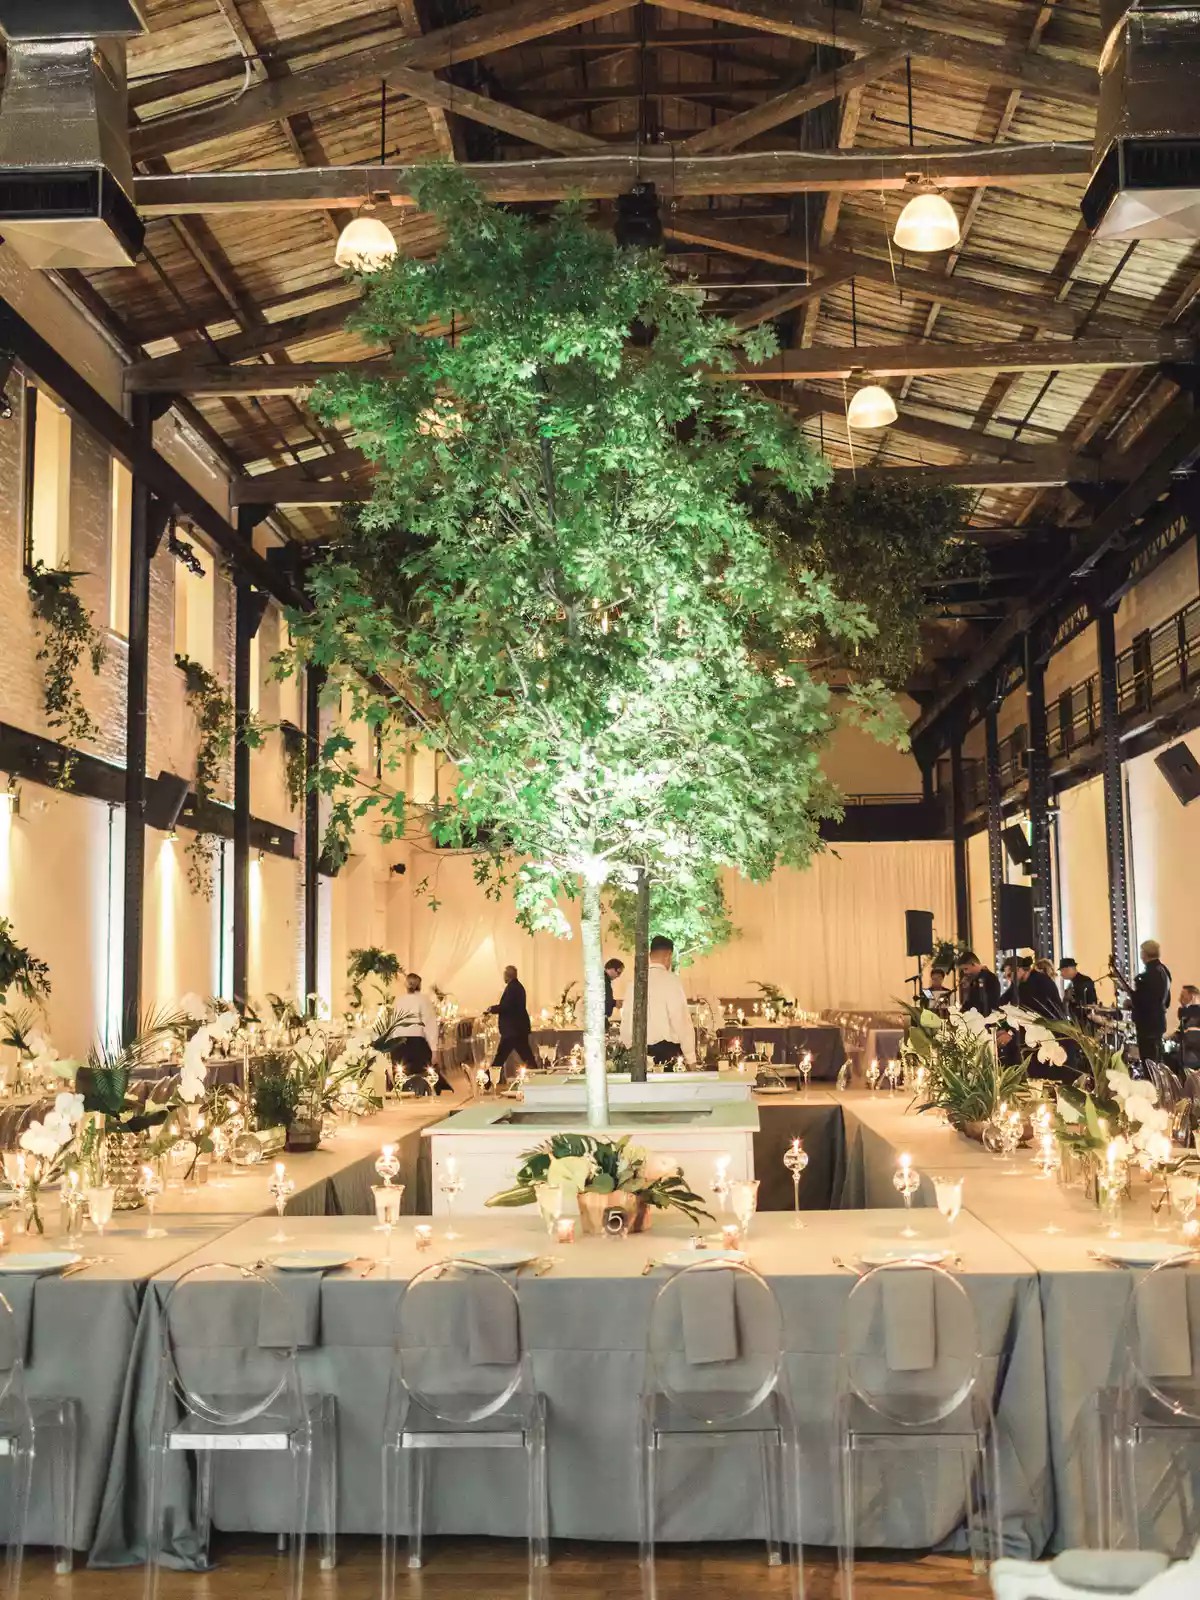 24 Unique Wedding Lighting Ideas To Make Your Day Shine - Like, Literally